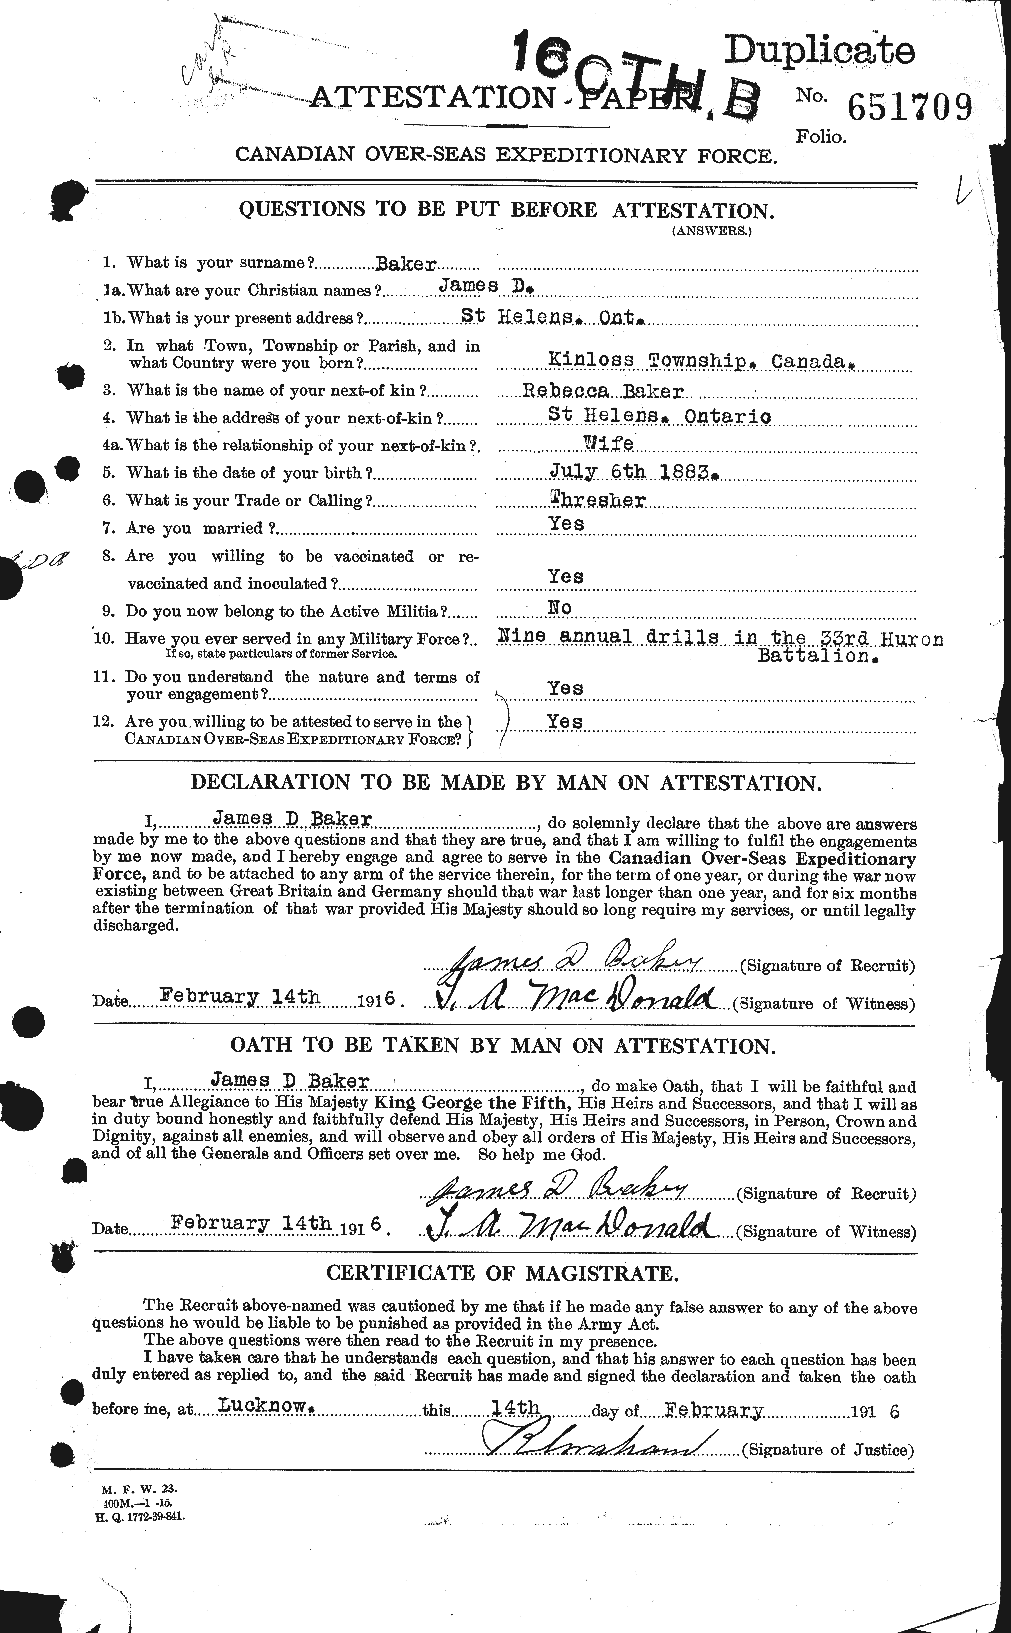 Personnel Records of the First World War - CEF 221729a